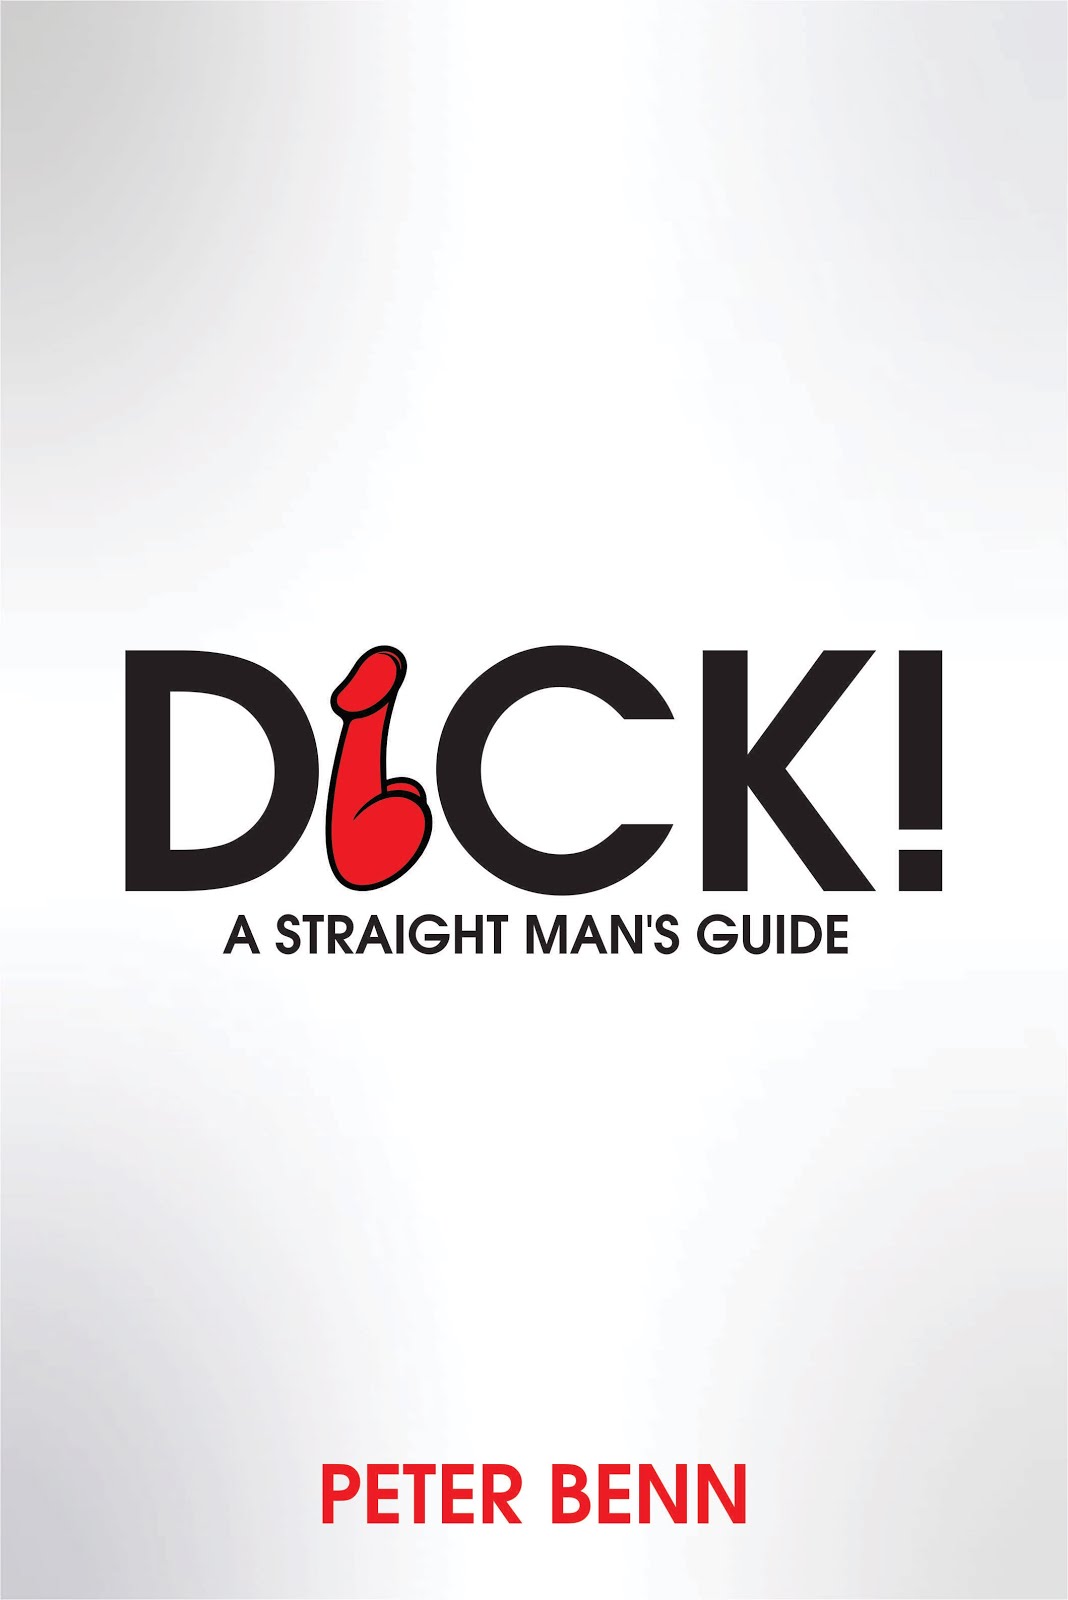 Sexiest and funniest book to read while isolating. A dick's-eye view of straight sex. Download now.